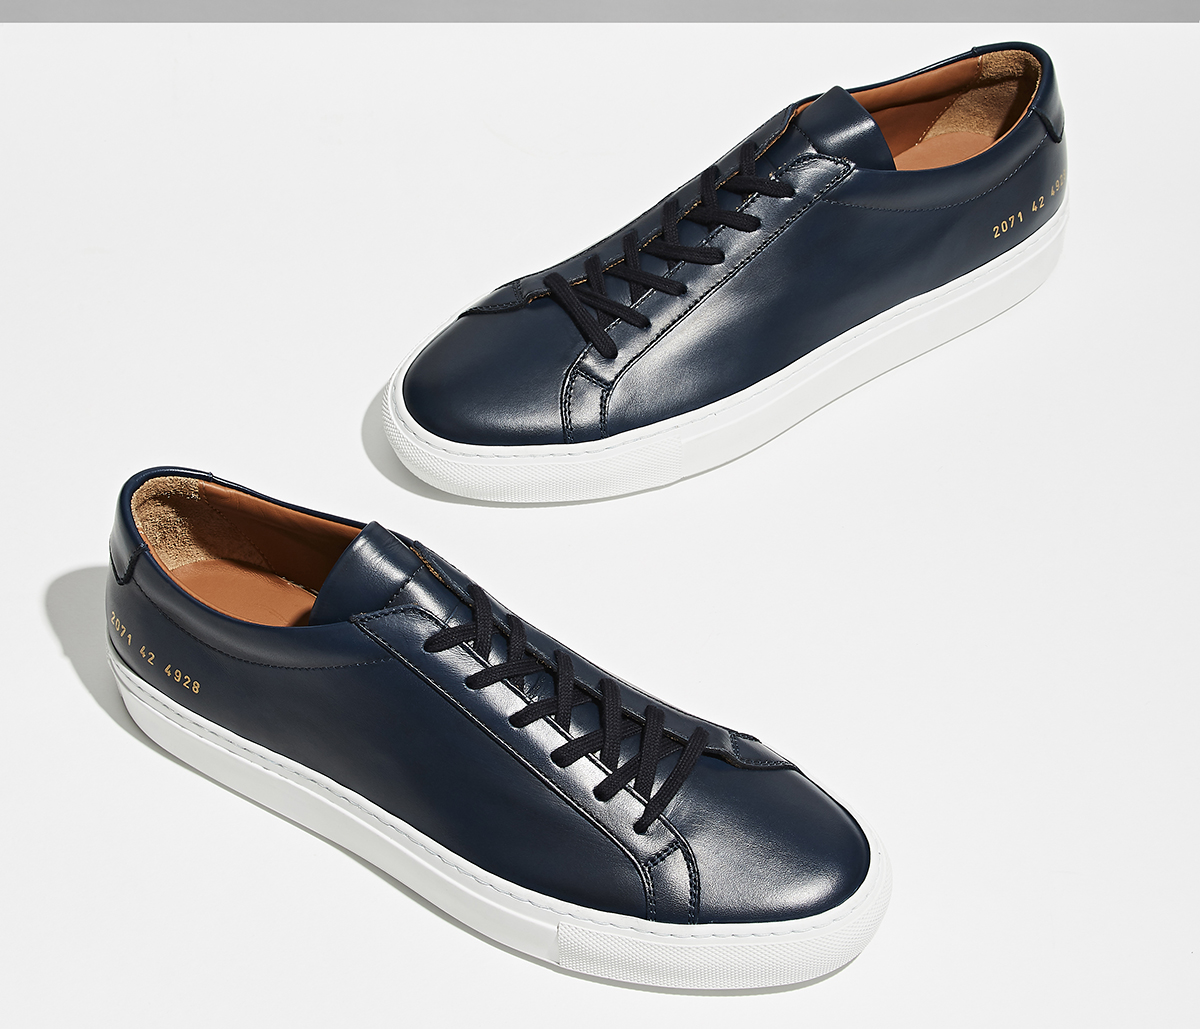 barneys common projects